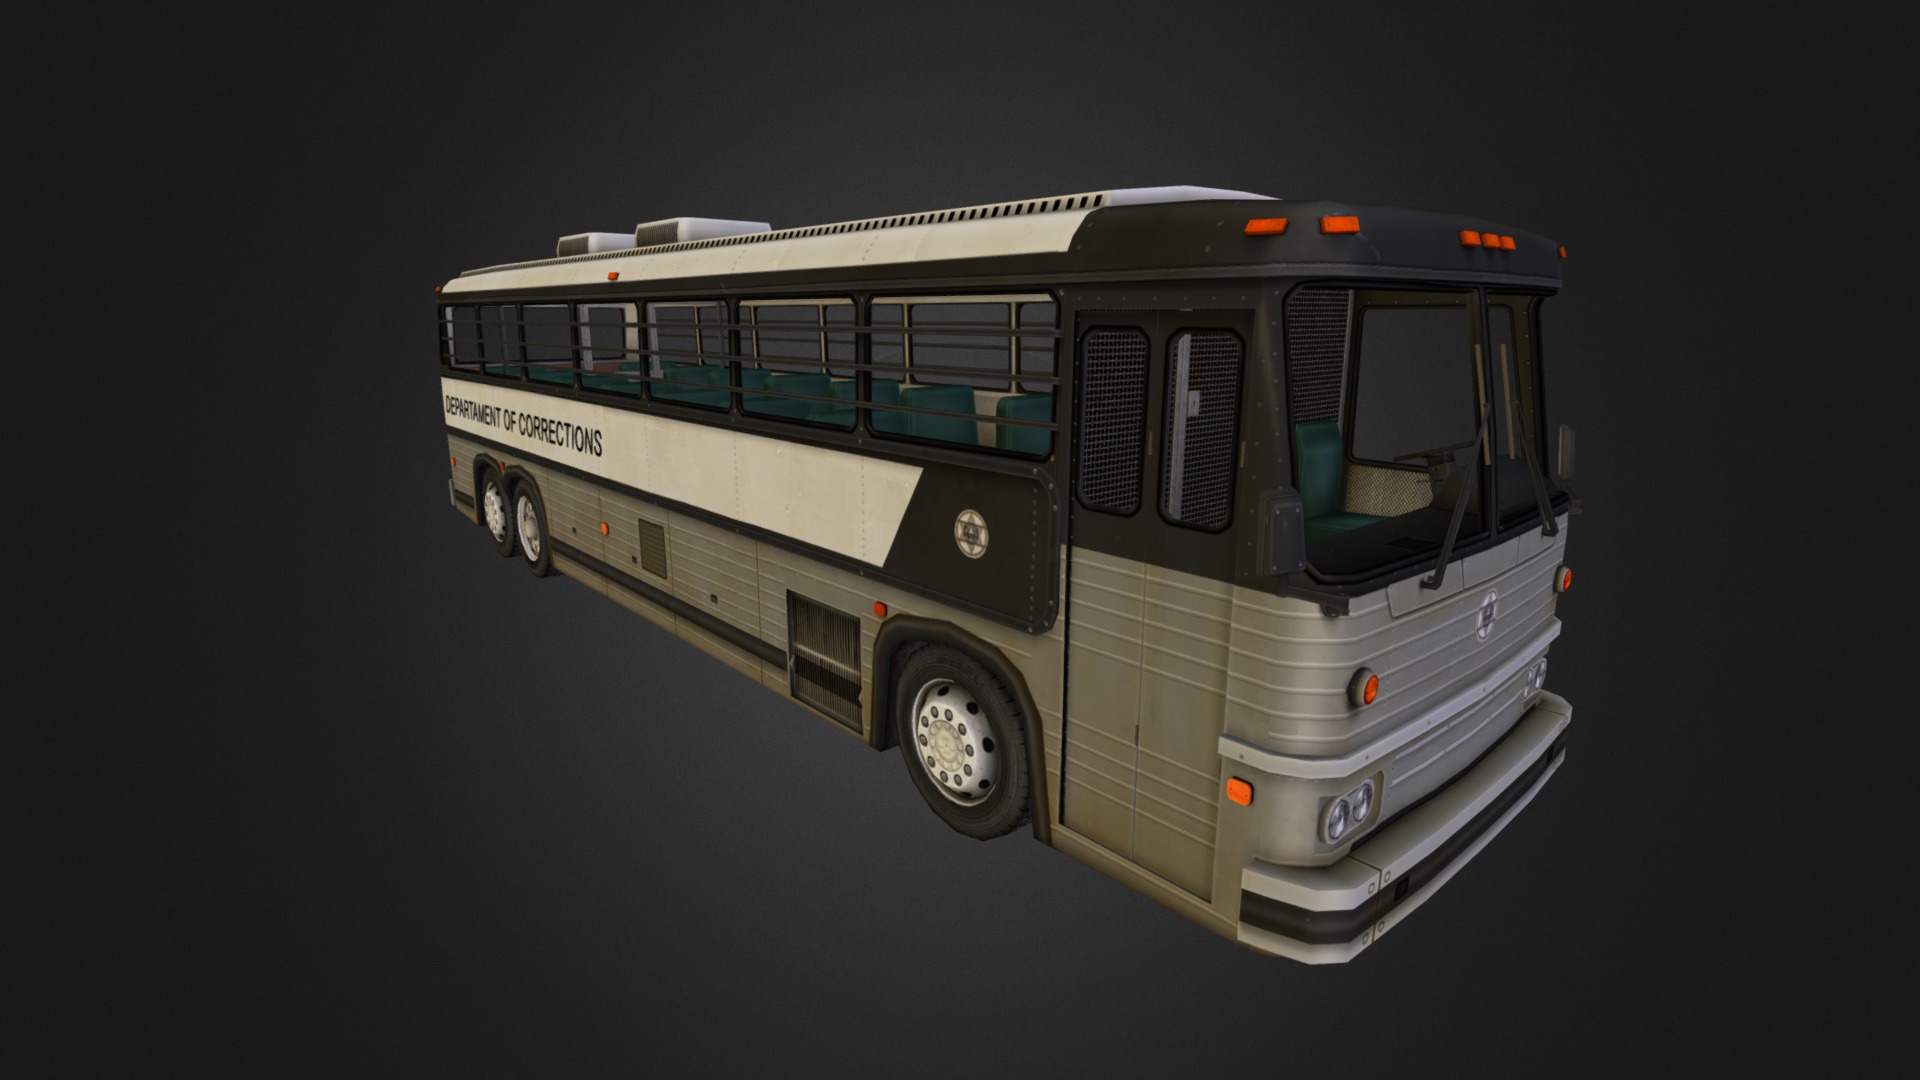 Published by 3DGarden.org - Prison bus - 3D model by shao3d 3d model